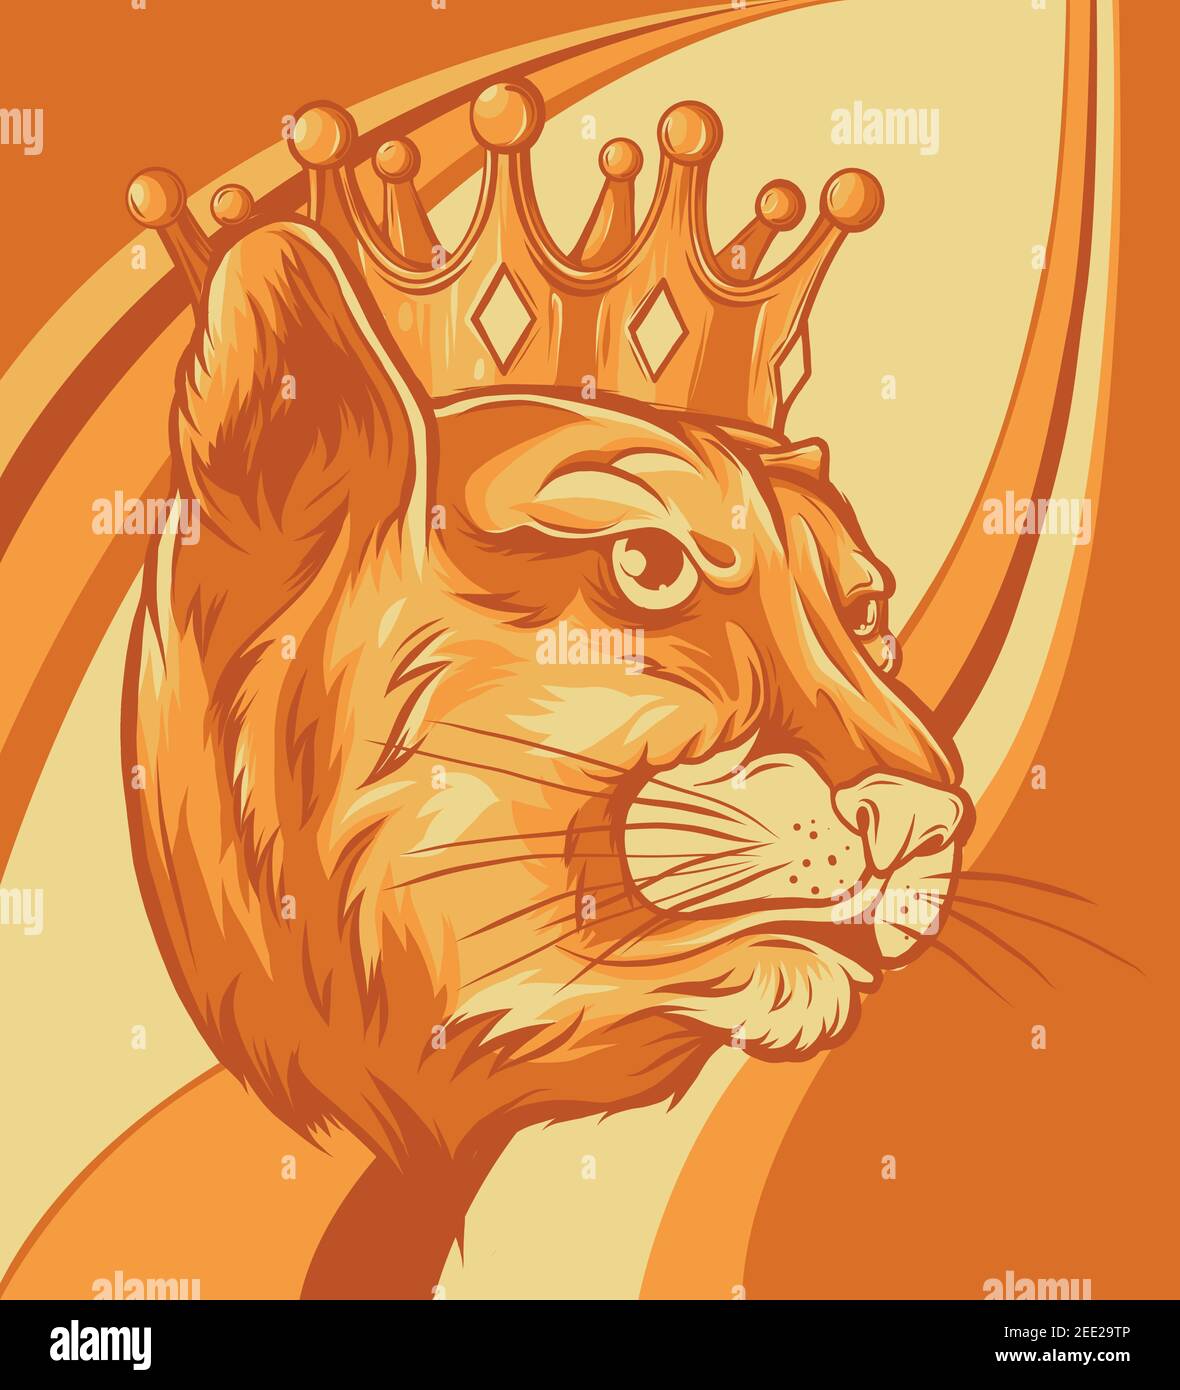 Panther and crown Stock Vector Images - Alamy